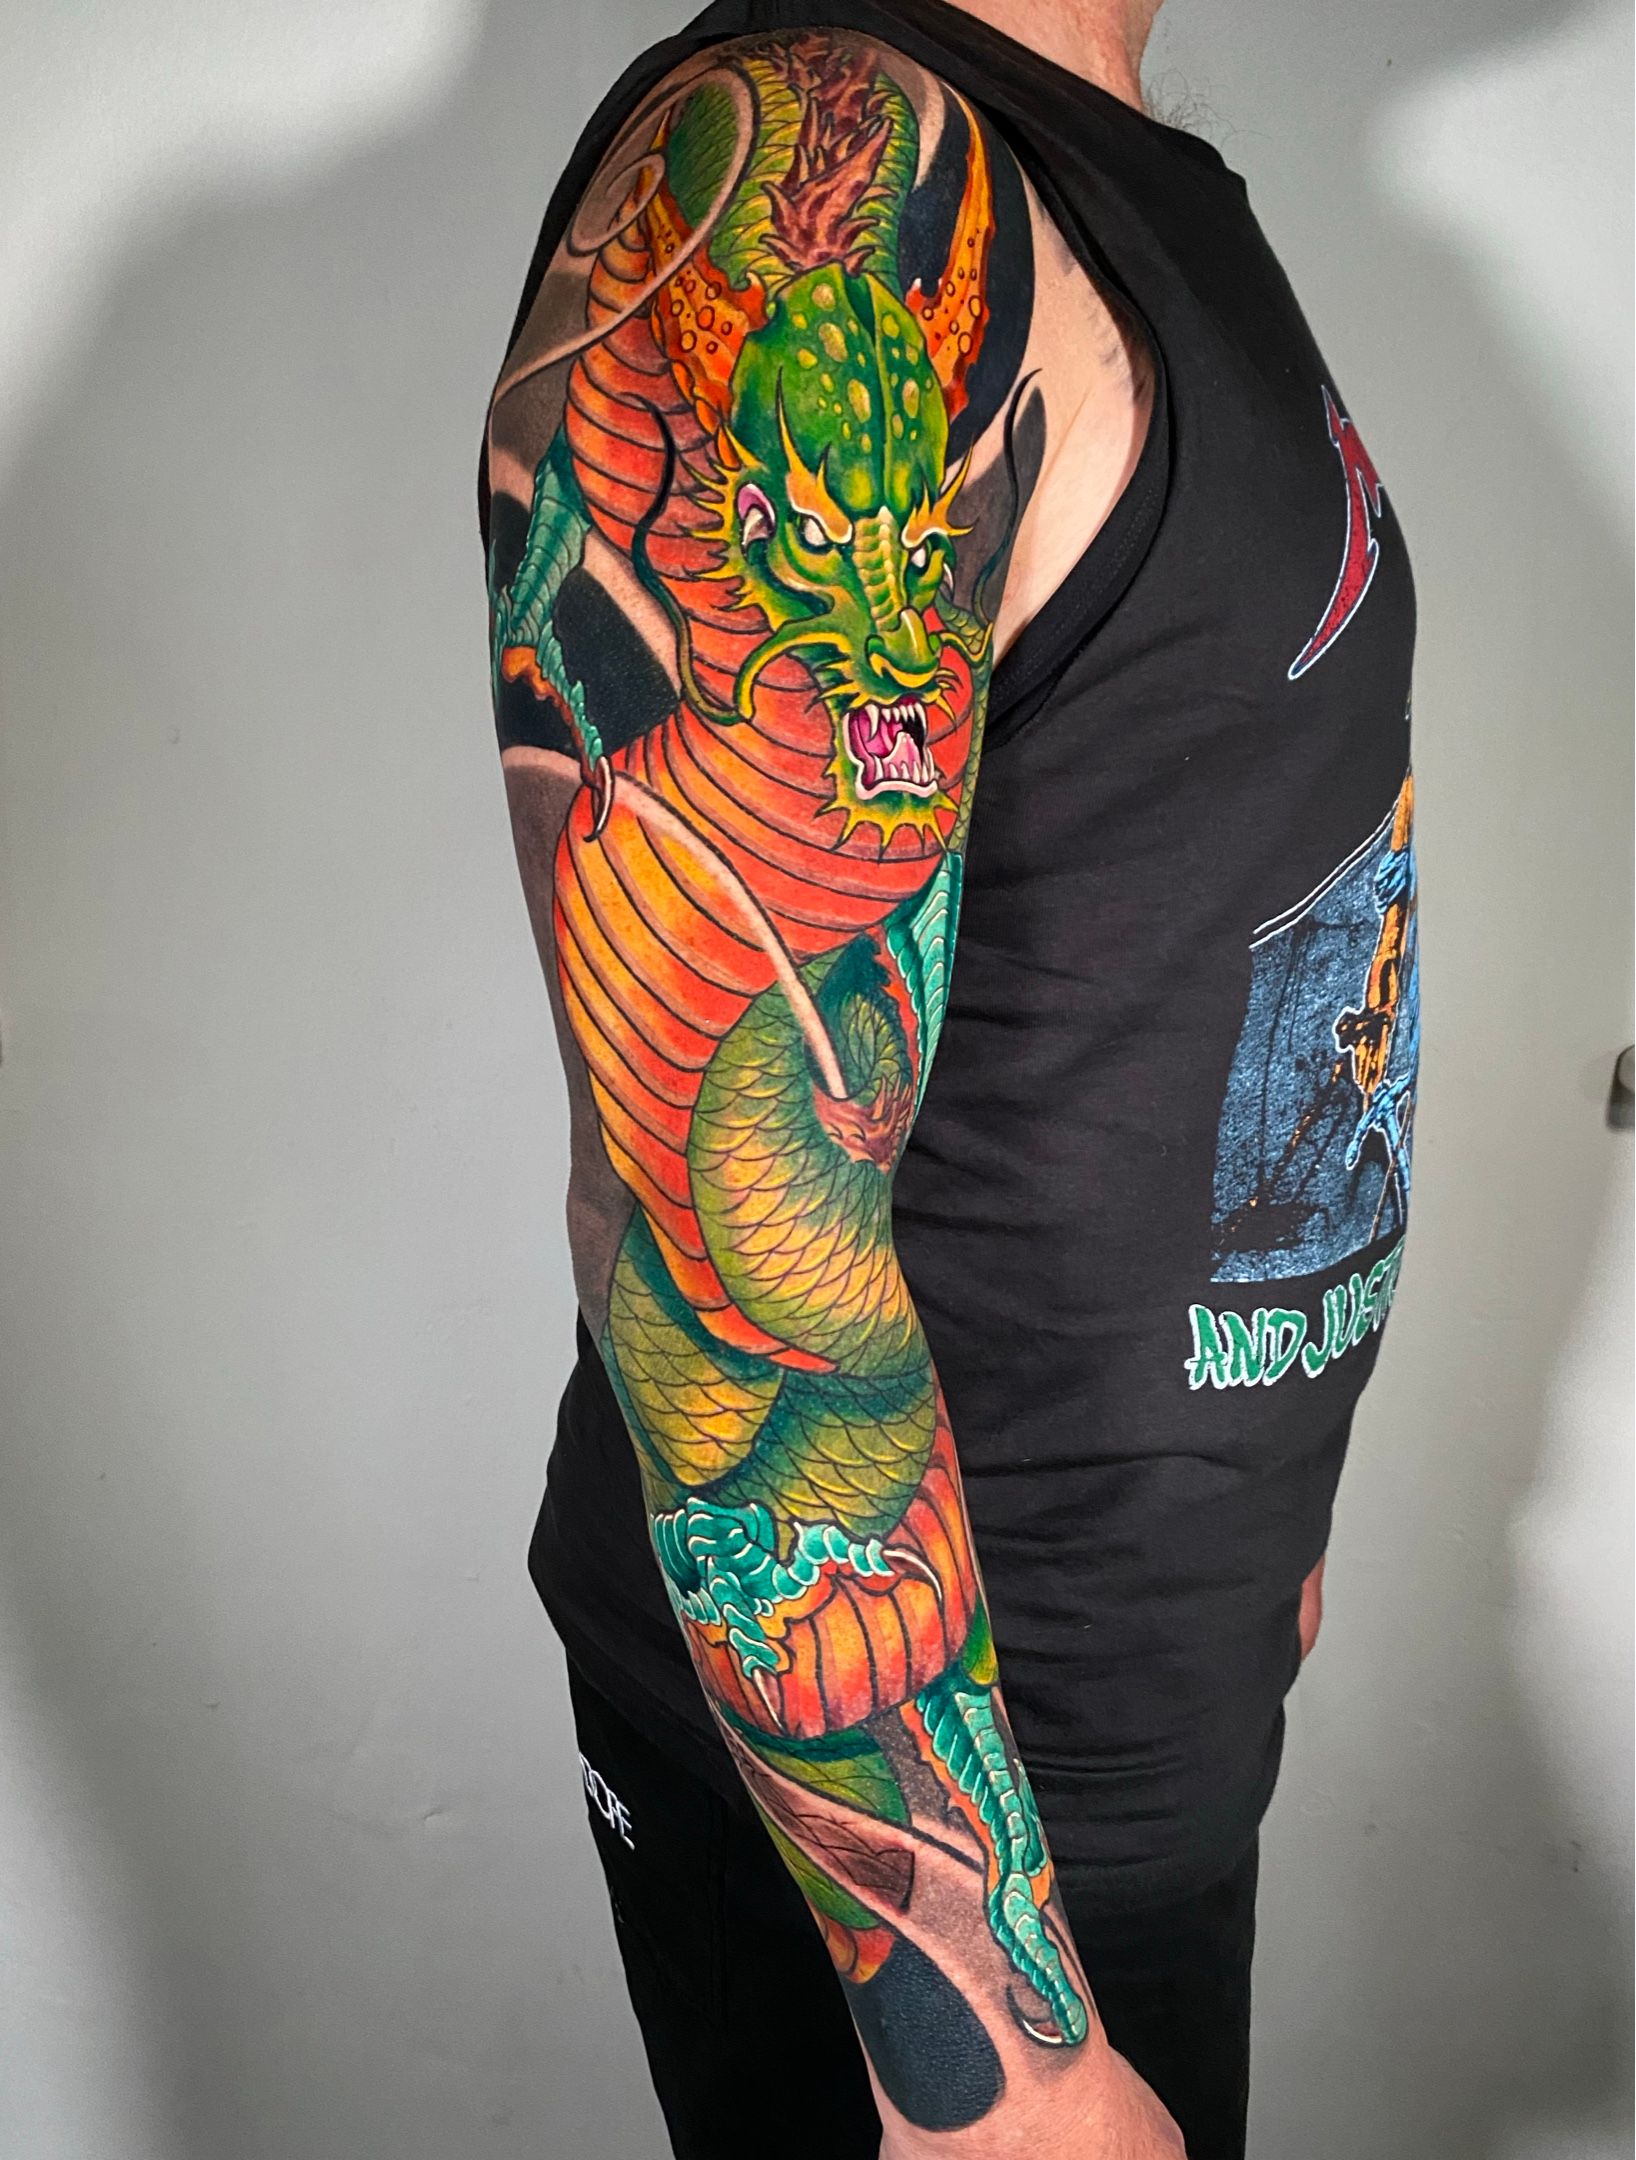 Checkout This Amazing Lord Krishna Full Sleeve Tattoo By Allan Gois At  Aliens Tattoo India | Hand tattoos for guys, Full sleeve tattoo, Alien  tattoo